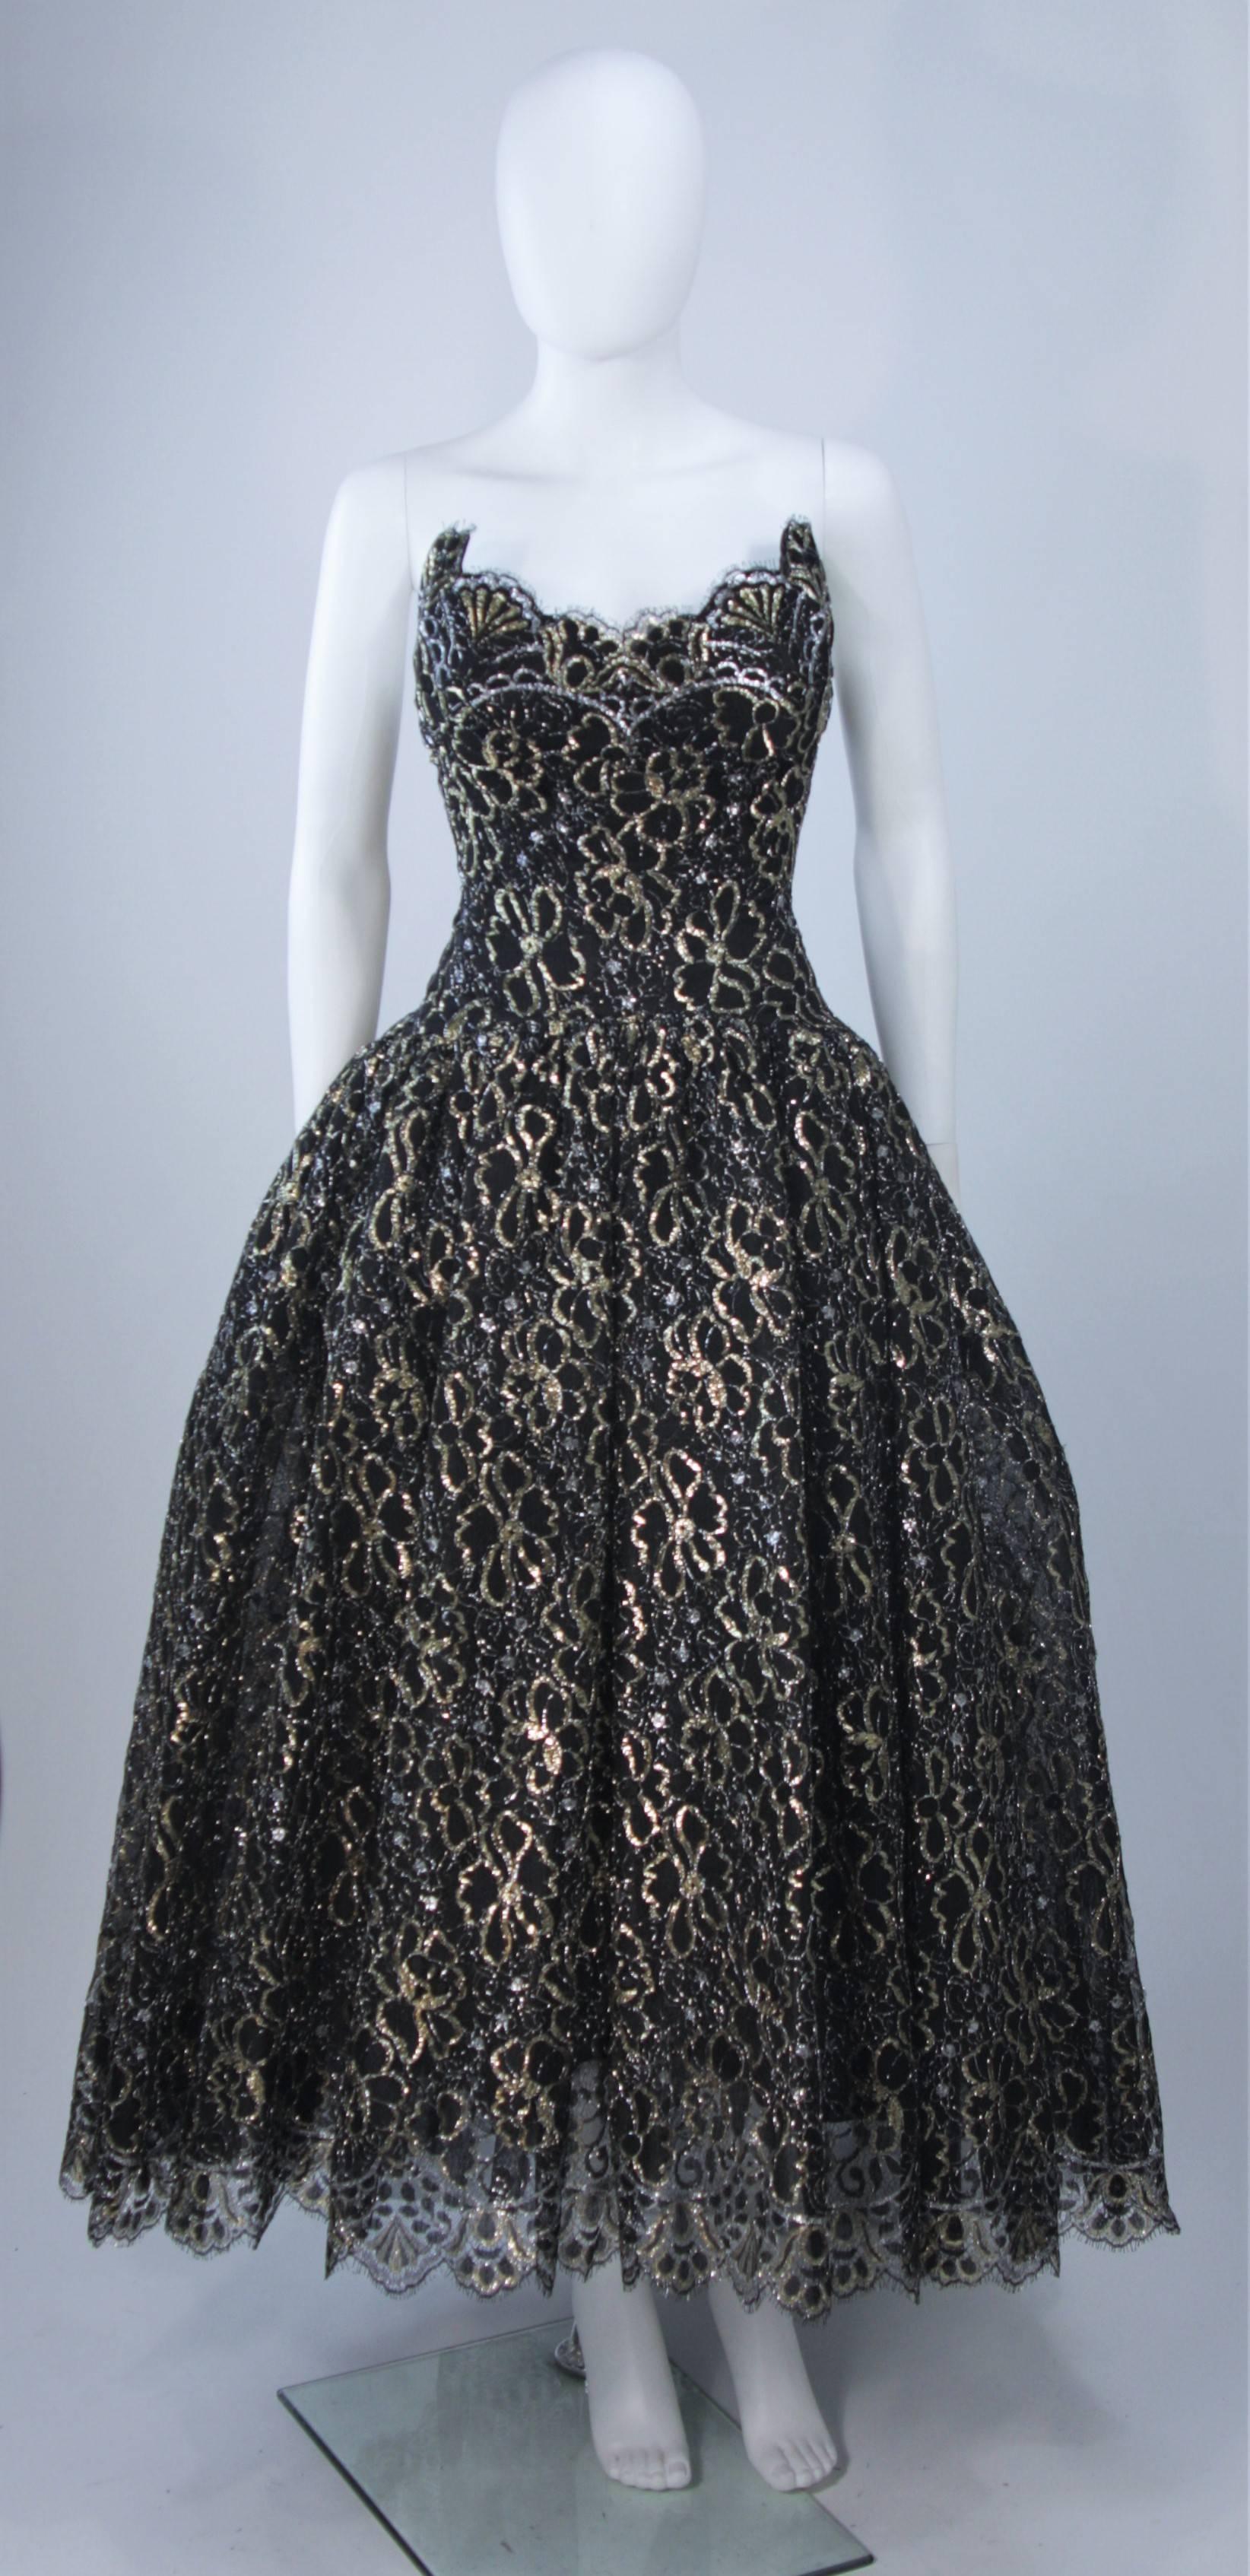  This Scaasi gown is composed of a black and gold floral patterned lace. The gown bodice features an exaggerated scalloped edge and the full skirt is layered for volume (also shot with additional crinoline). There is a center back zipper and boned